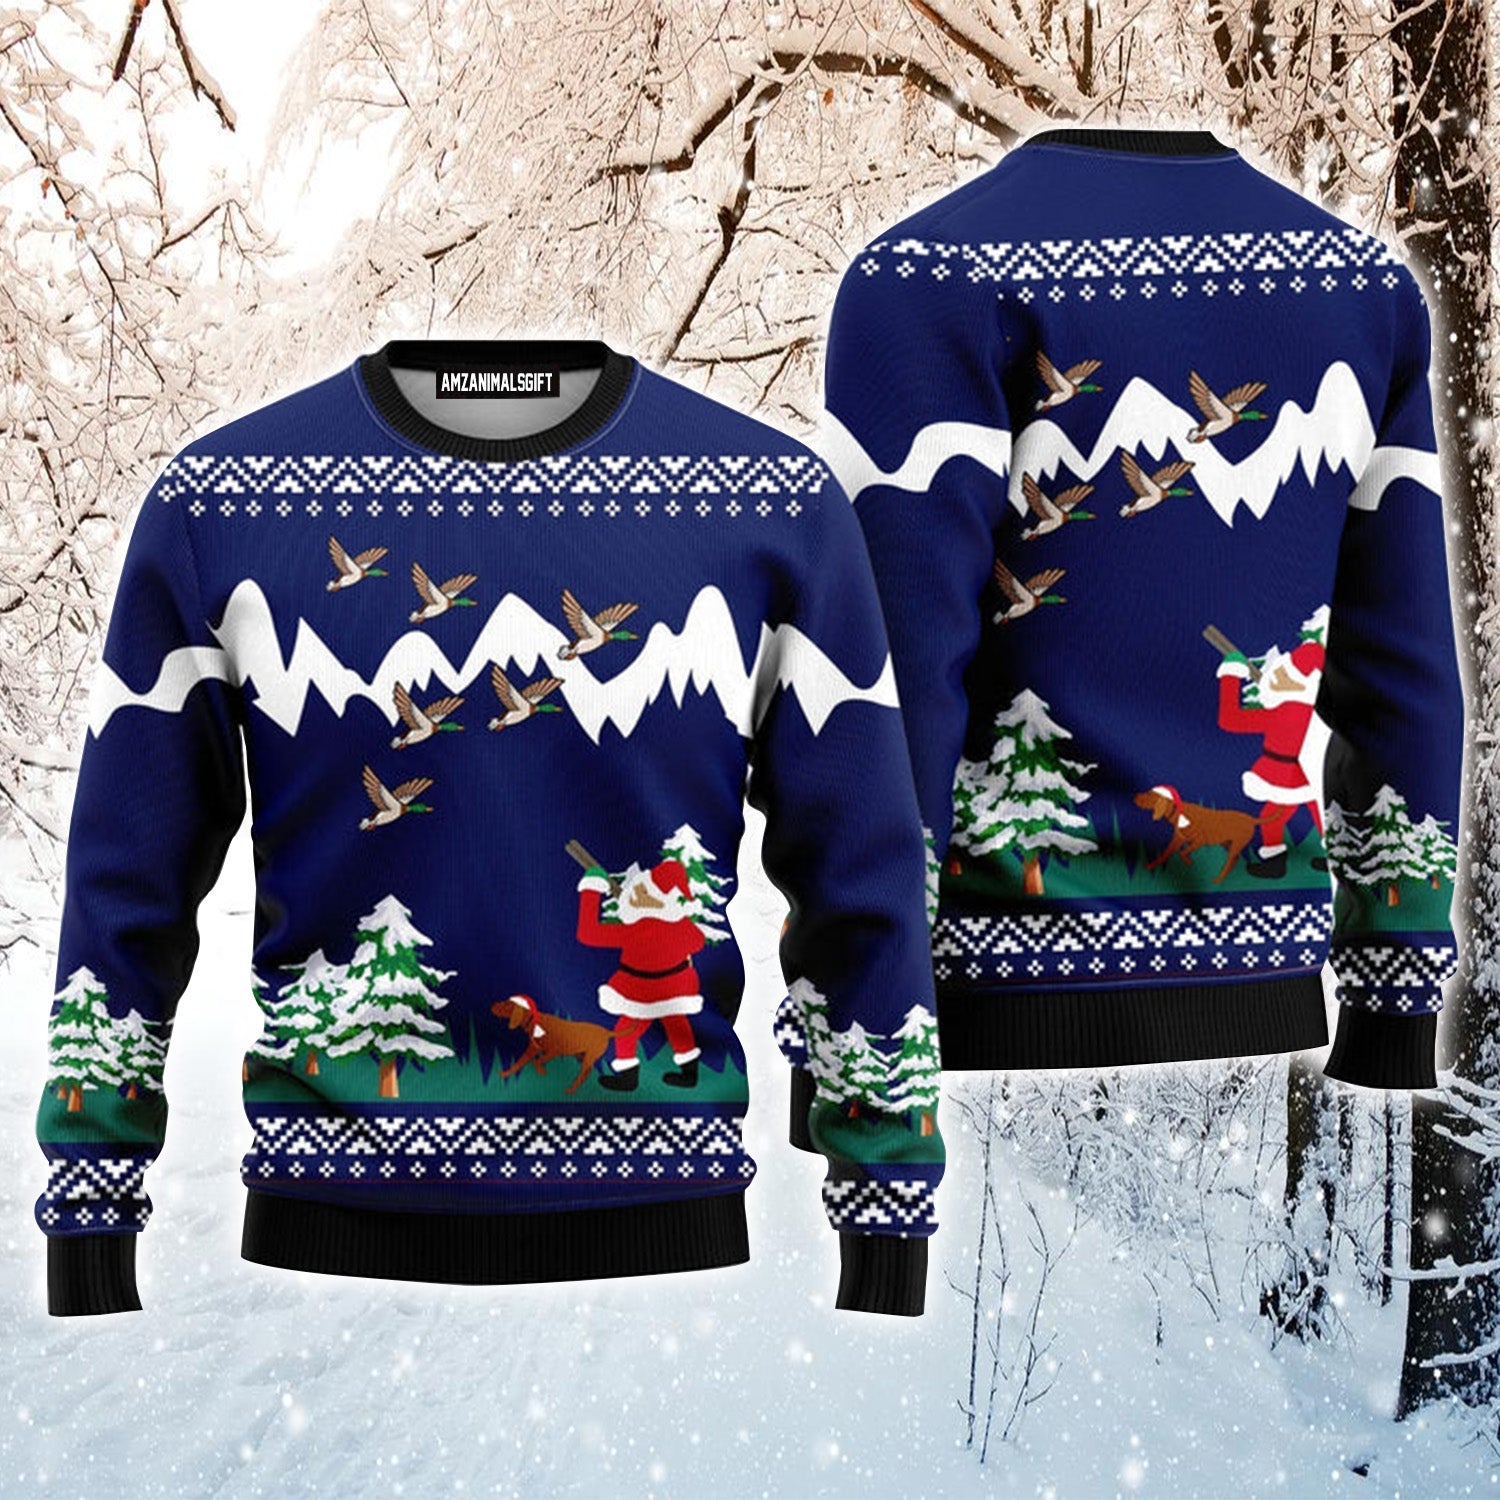 Duck Hunting Blue Urly Christmas Sweater, Christmas Sweater For Men & Women - Perfect Gift For Christmas, Hunting Lovers, Hunters